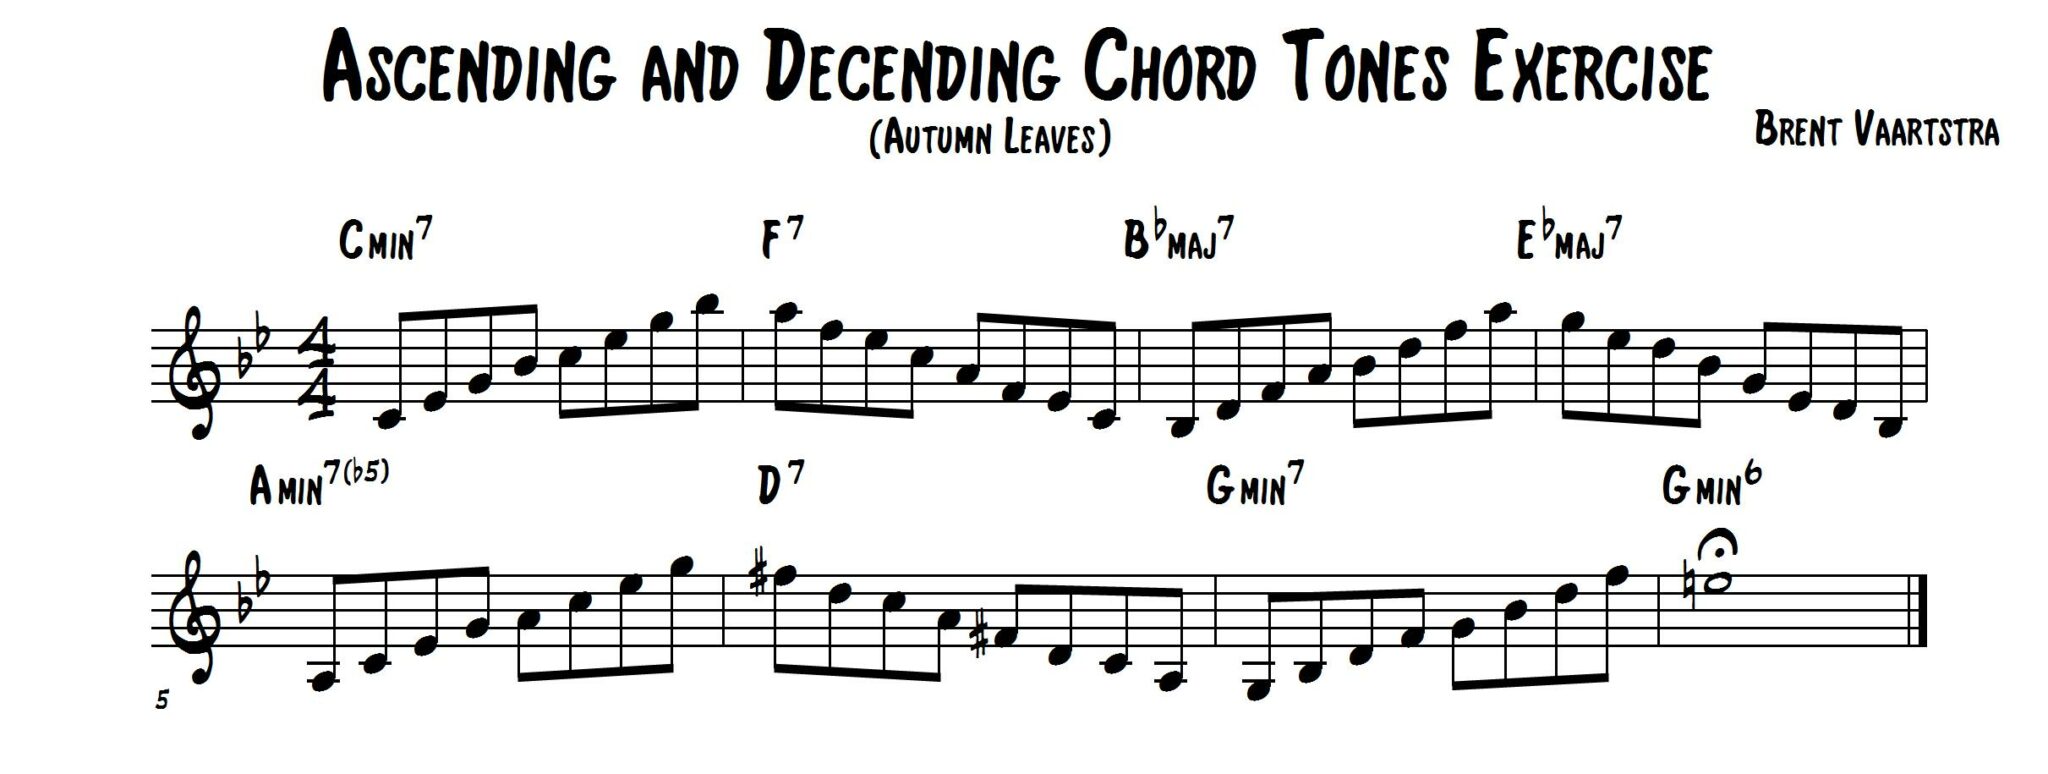 Ascending and Decending Chord Tones Exercise